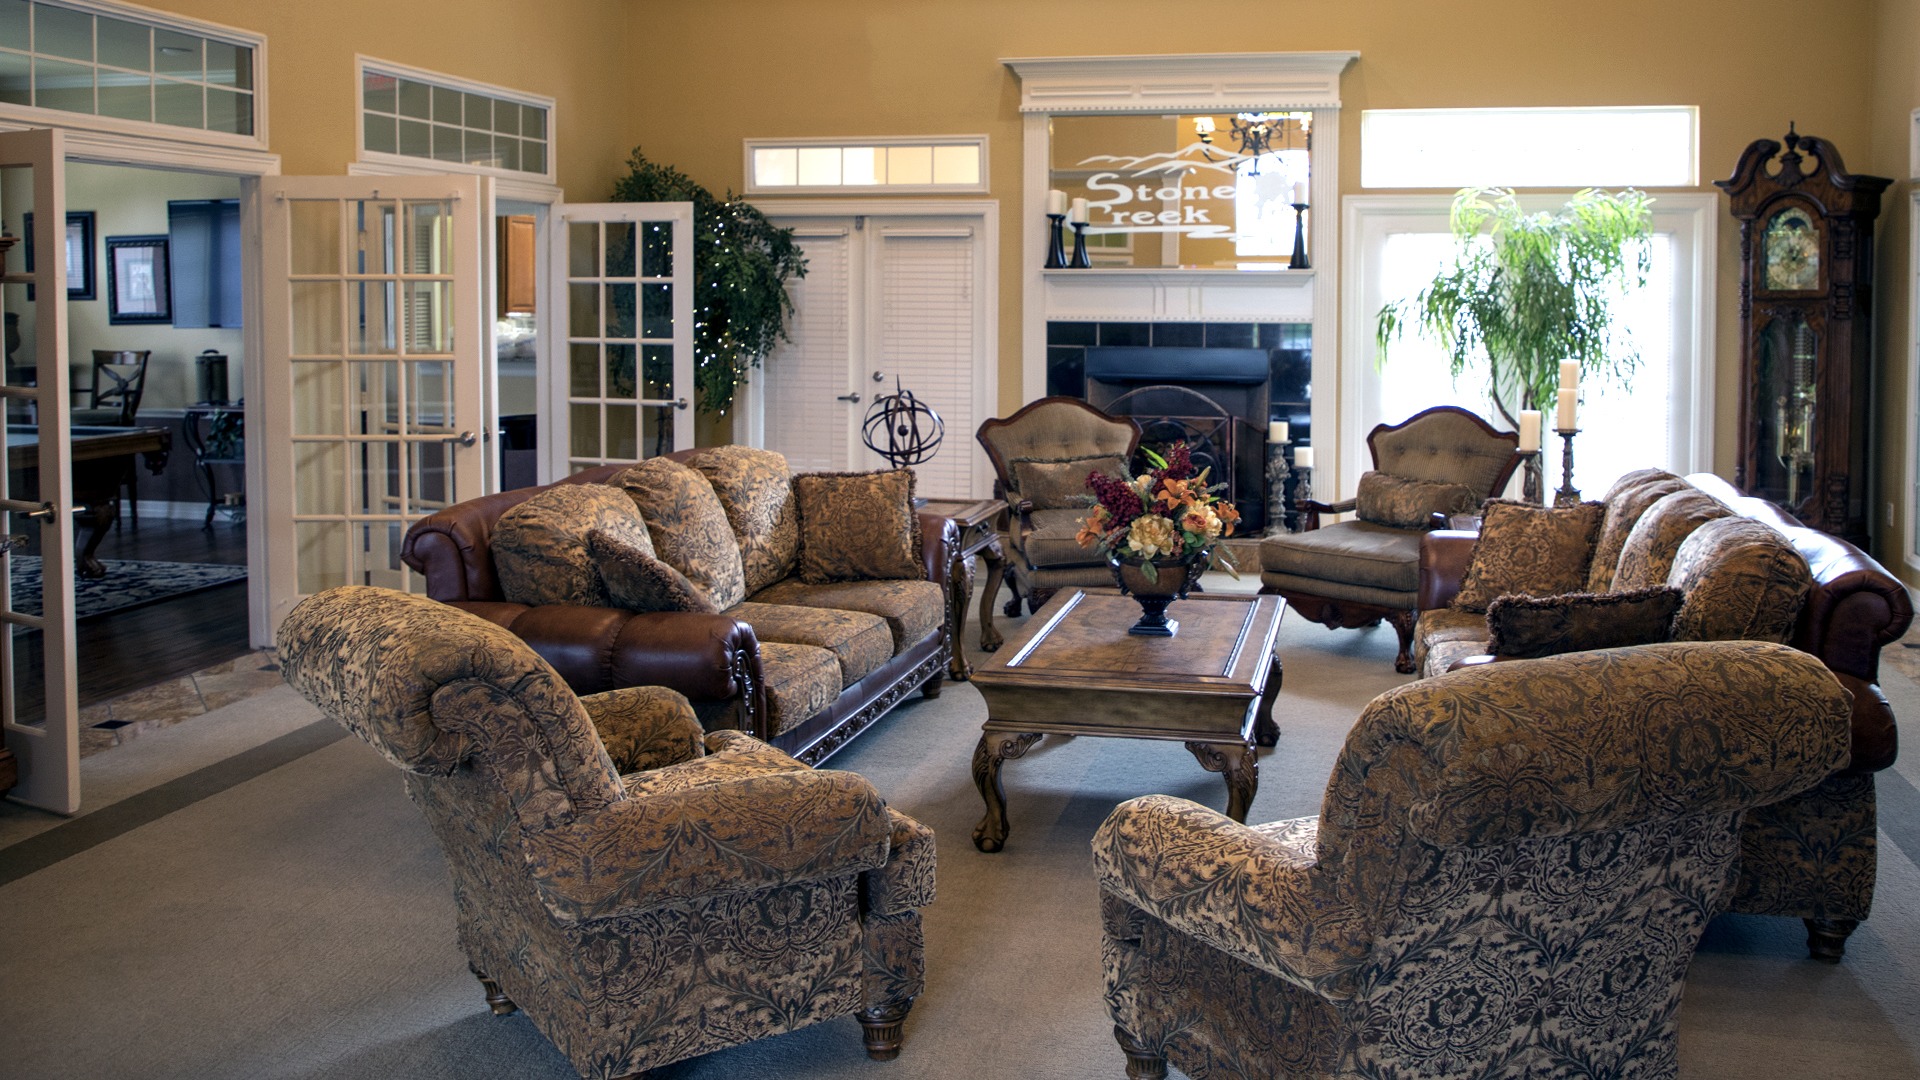 Interior of Stone Creek Apartment Welcome Center lobby with comfortable couches and chairs set up with a fireplace and mirror behind